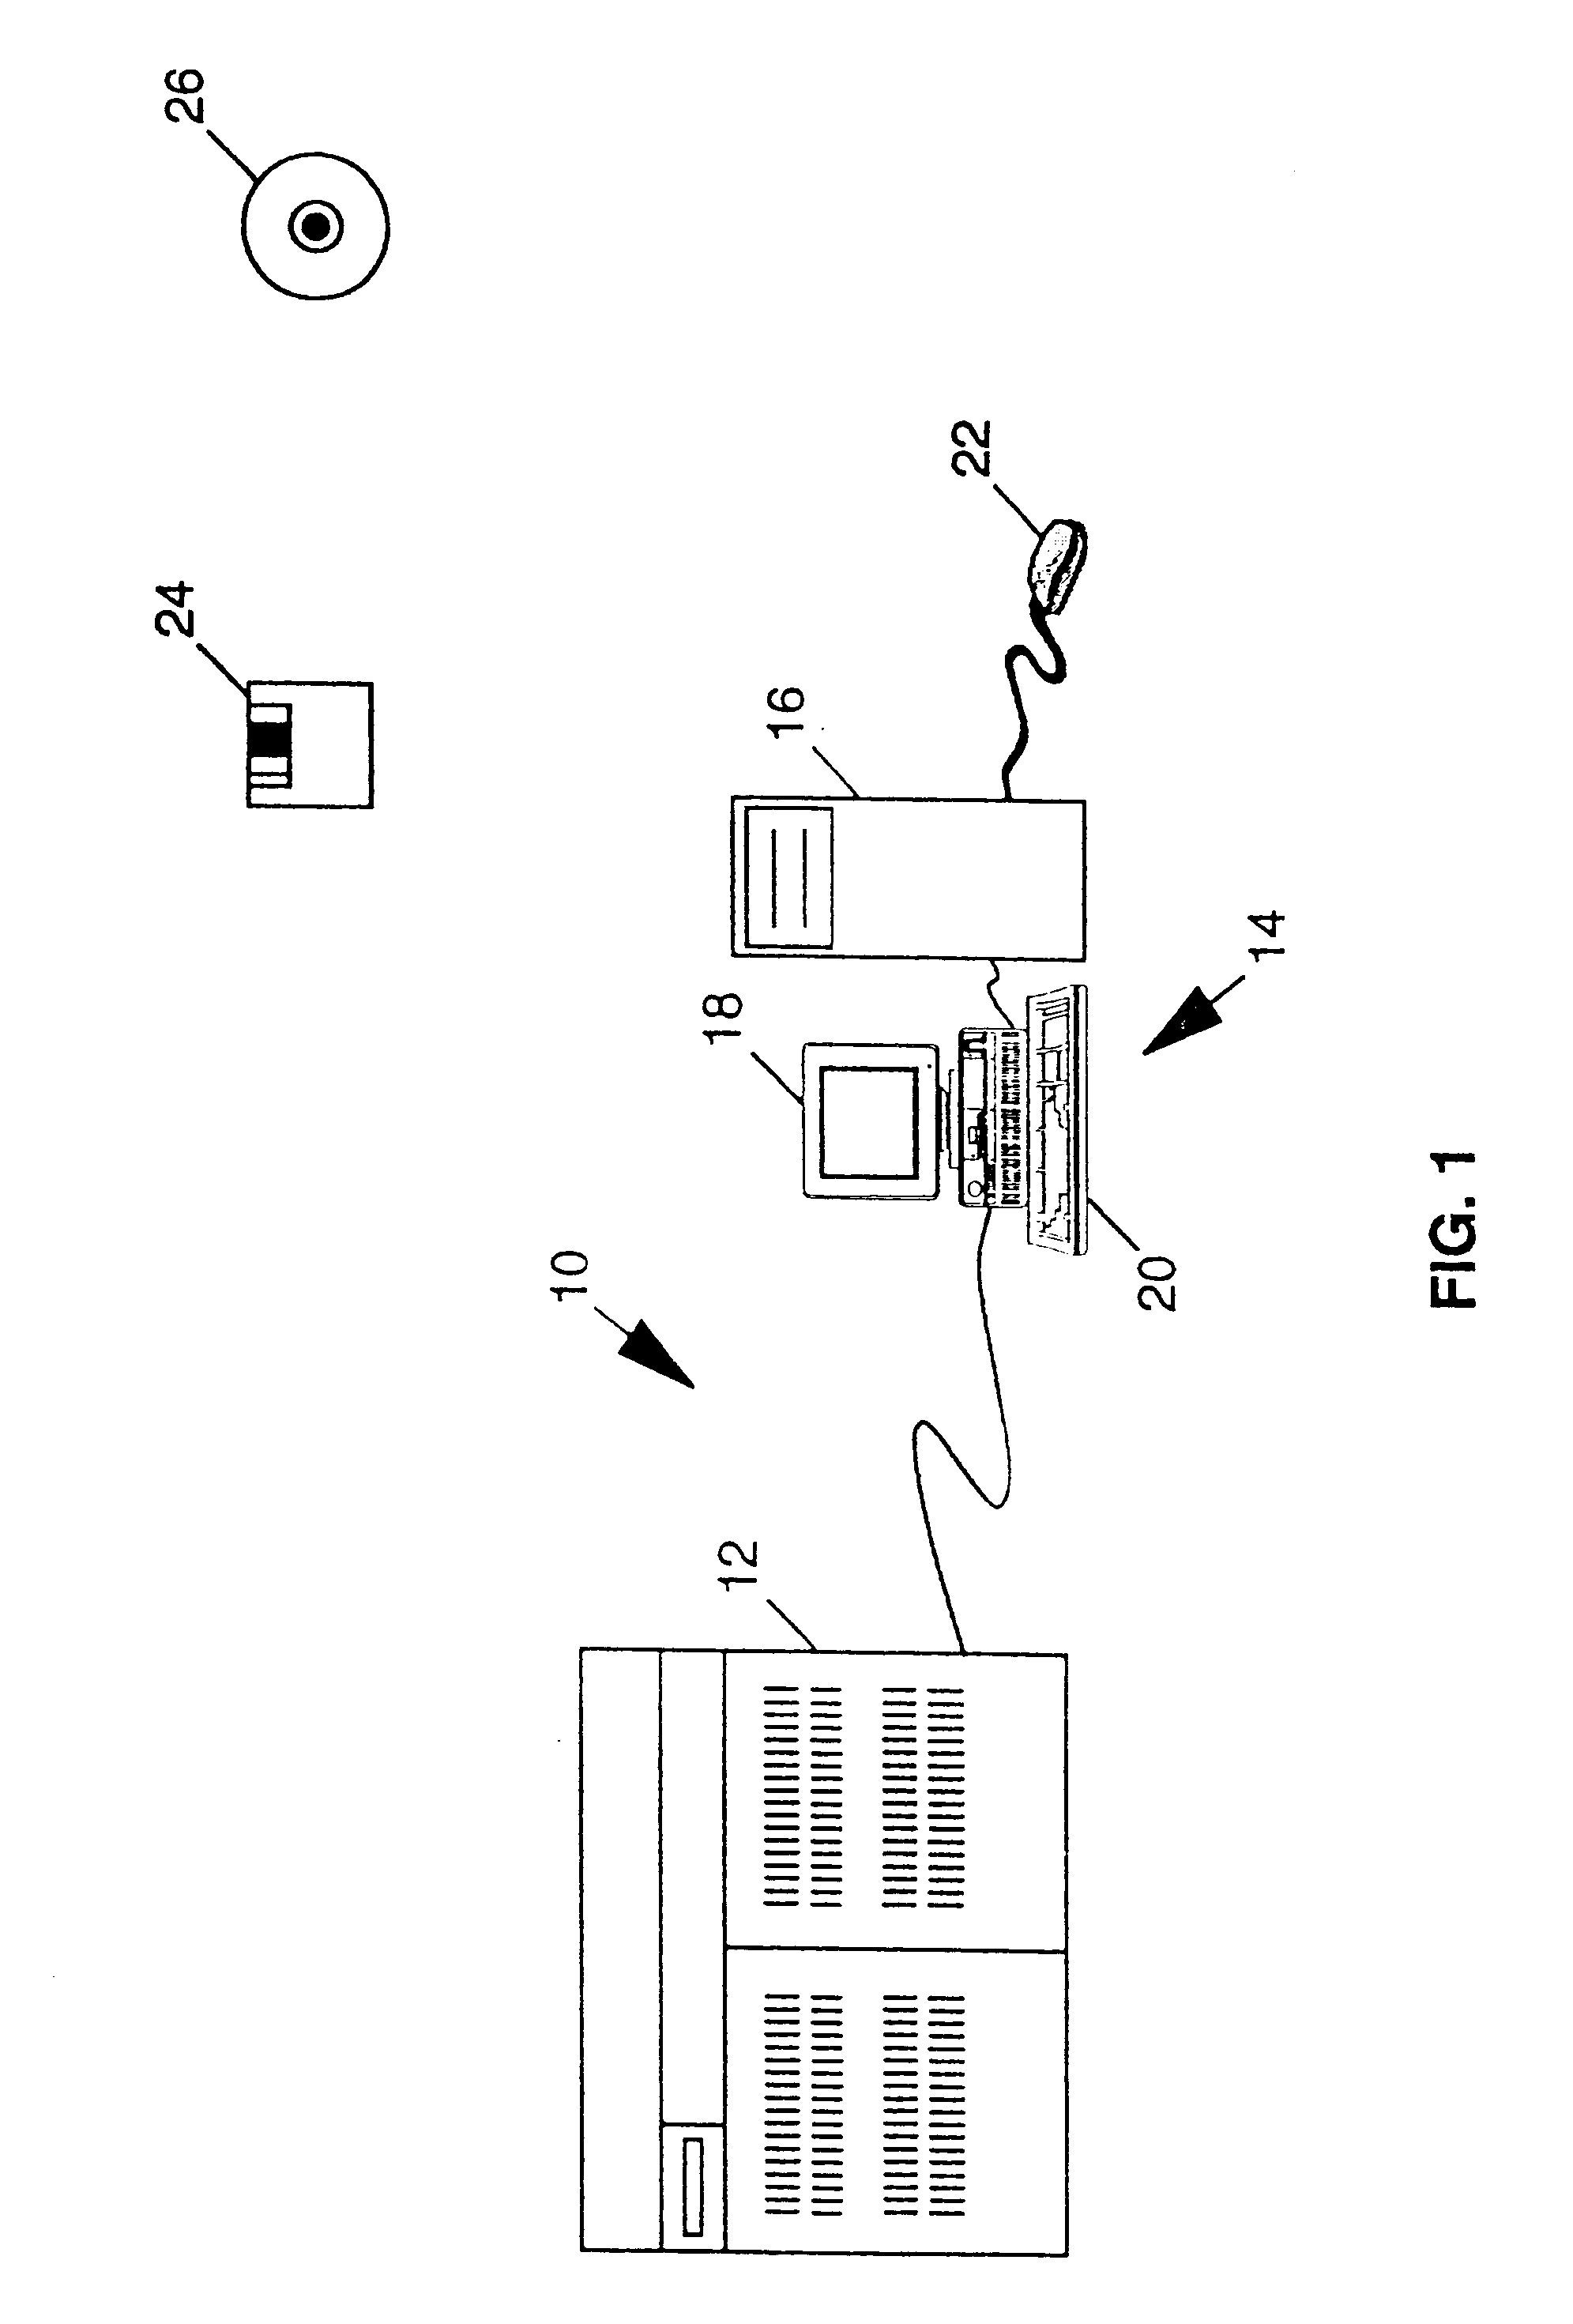 Data processing system and method of task management within a self-managing application